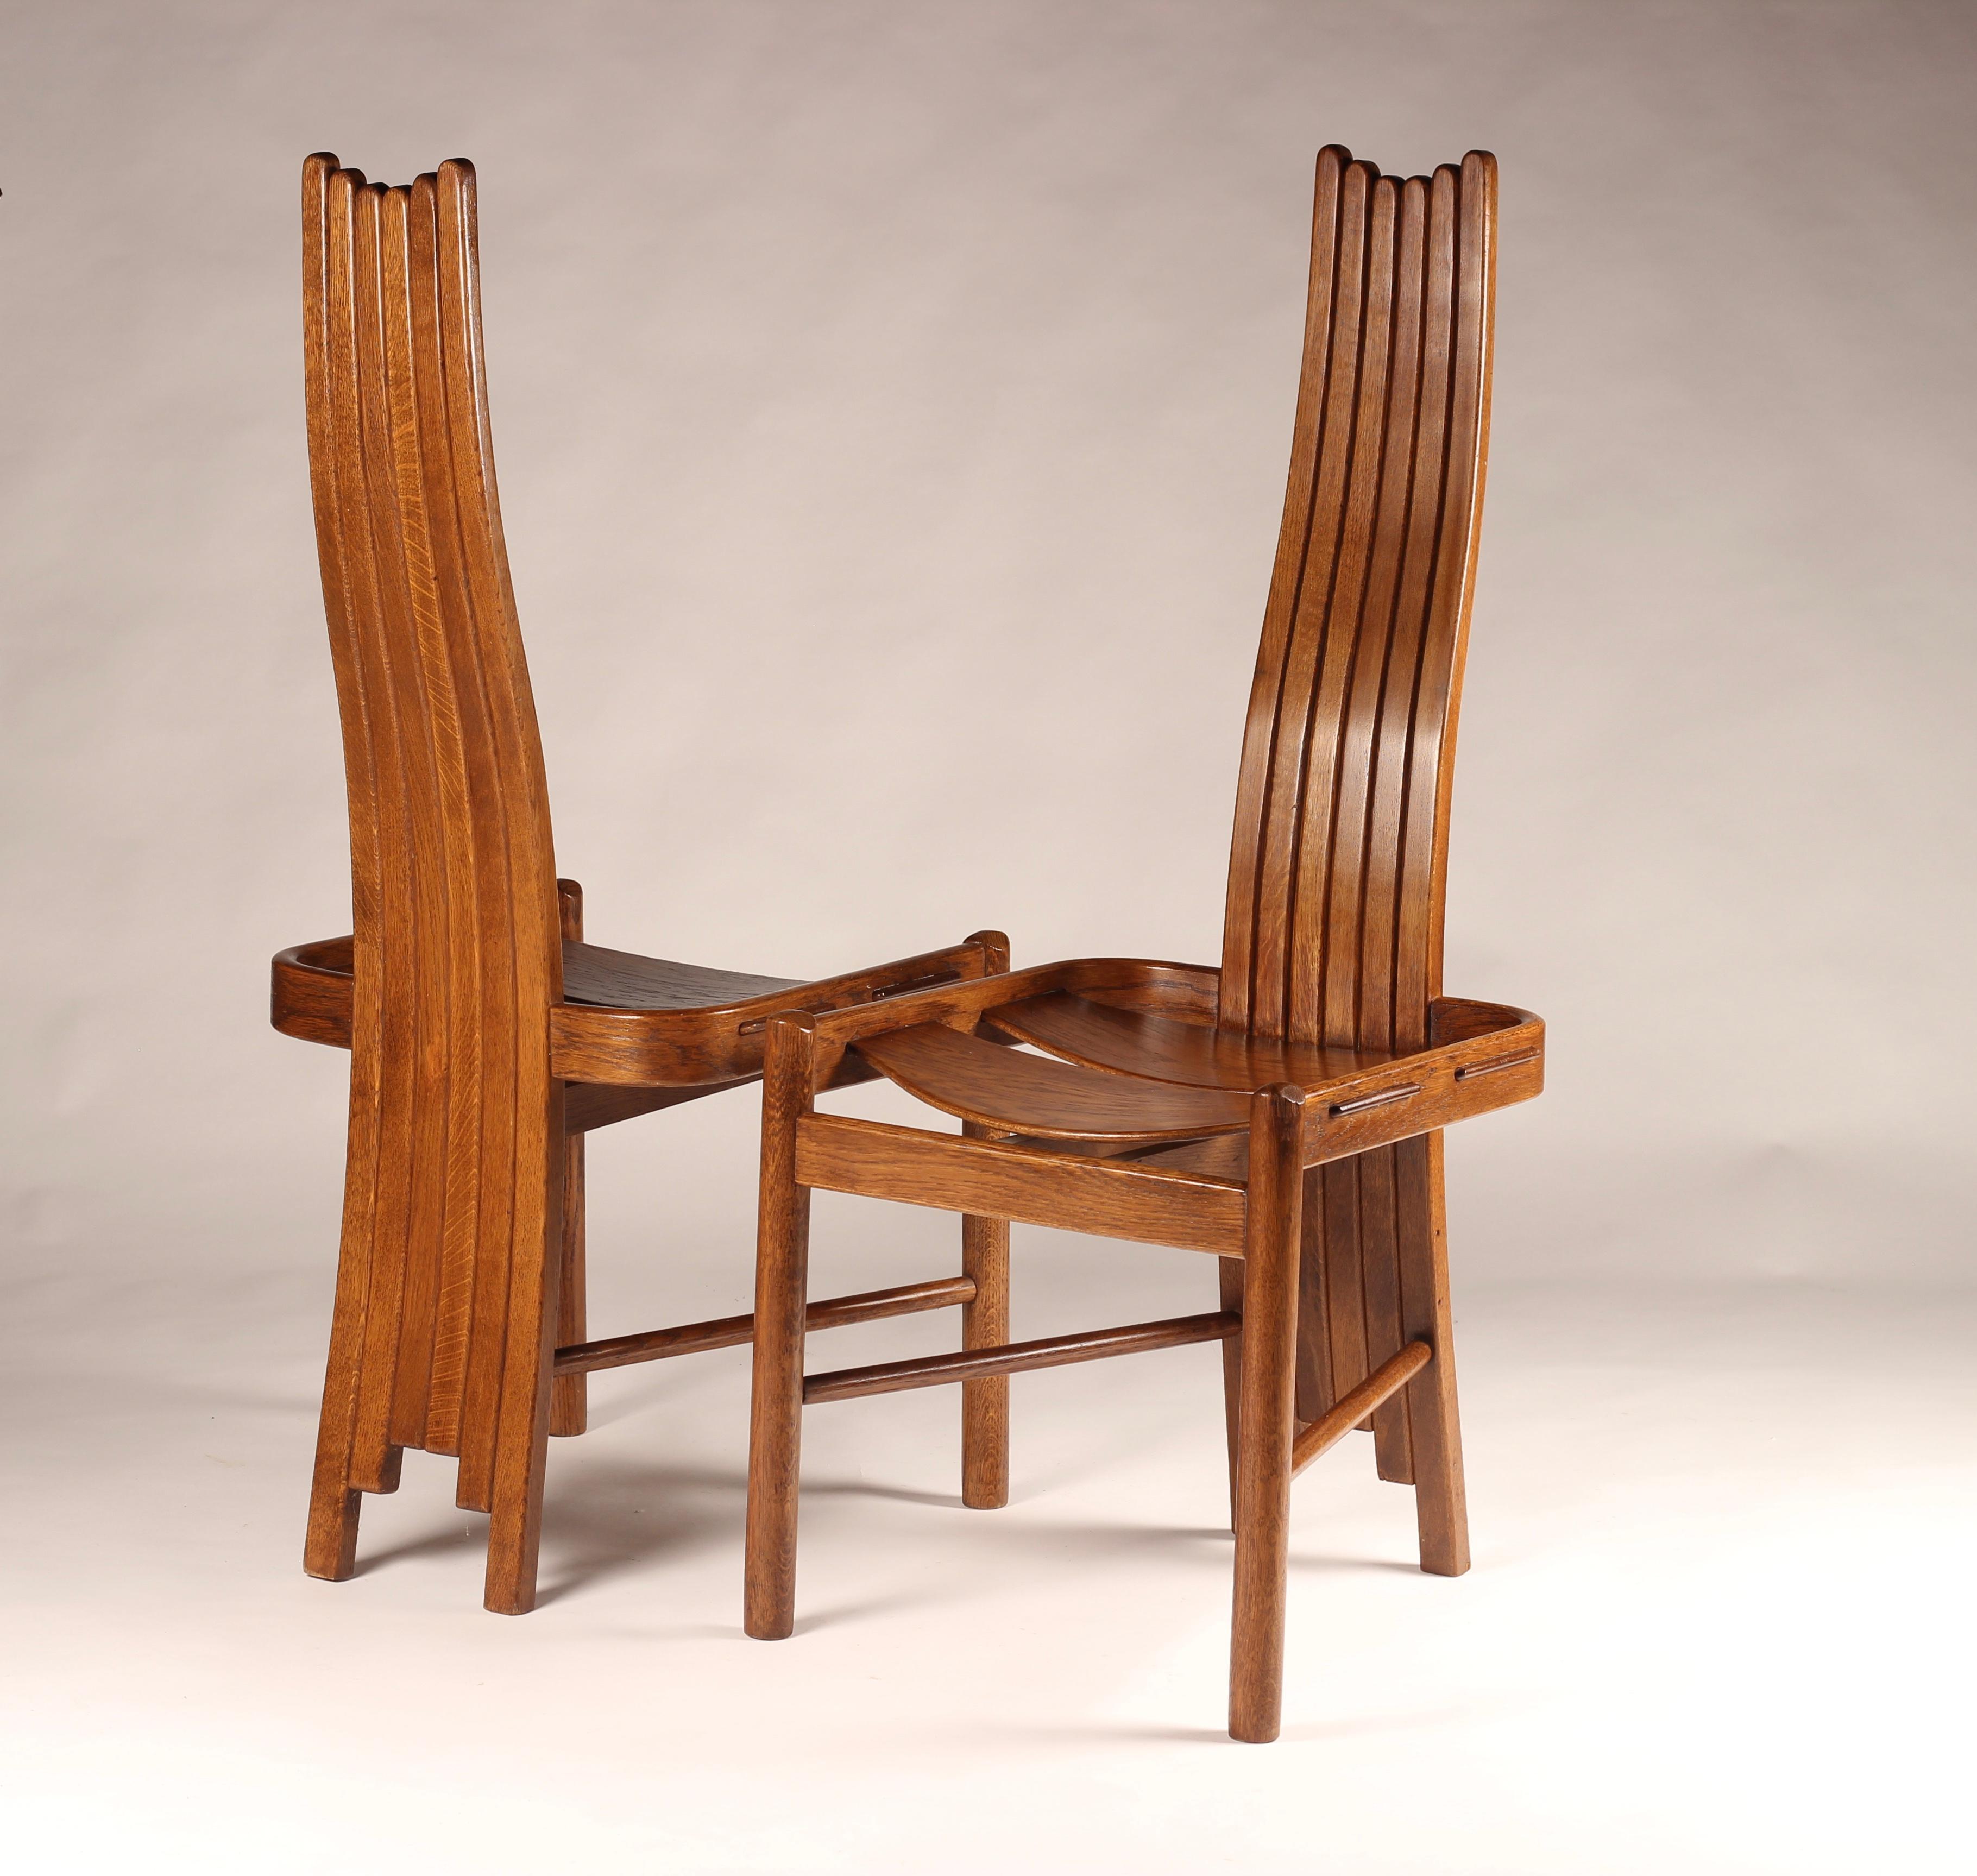 A beautifully crafted and very interesting set of four Oak Dining Chairs or side chairs in the manner of Charles Rennie Mackintosh. Straddling the styles around the early 20th Century these chairs show signs of the Arts & Crafts movement, Symbolism,